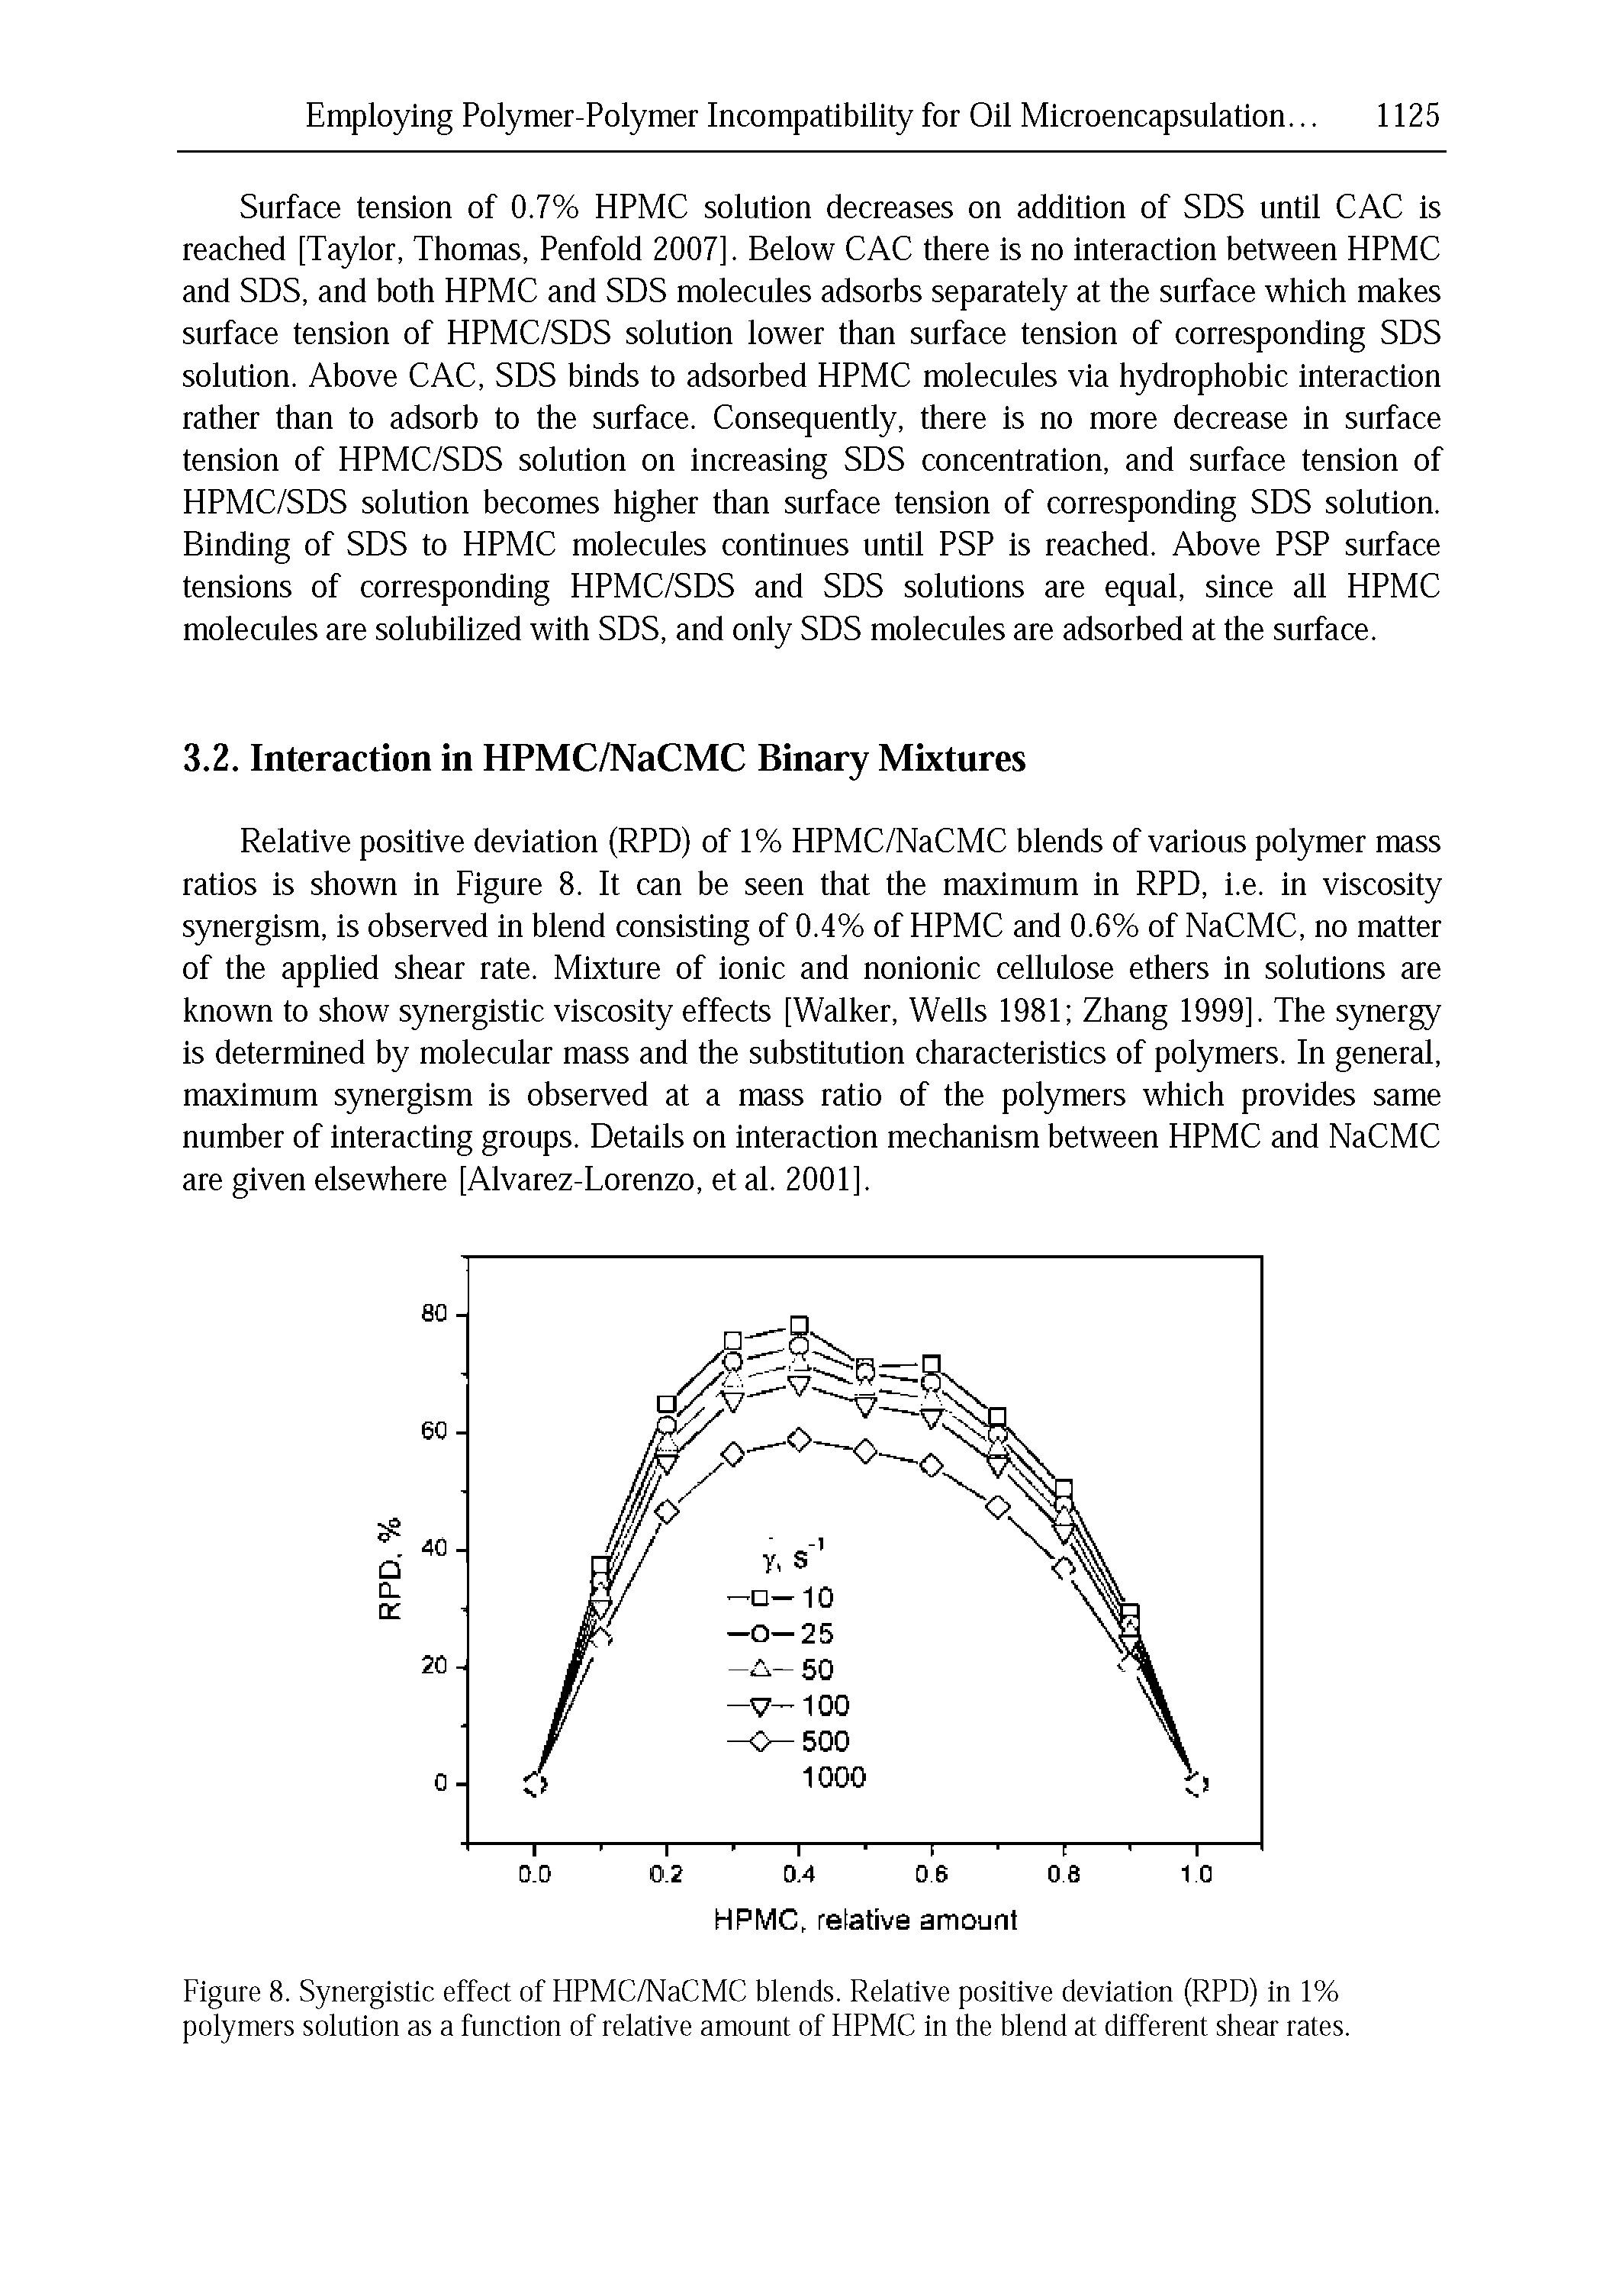 Figure 8. Synergistic effect of HPMC/NaCMC blends. Relative positive deviation (RPD) In 1% polymers solution as a function of relative amount of HPMC In the blend at different shear rates.